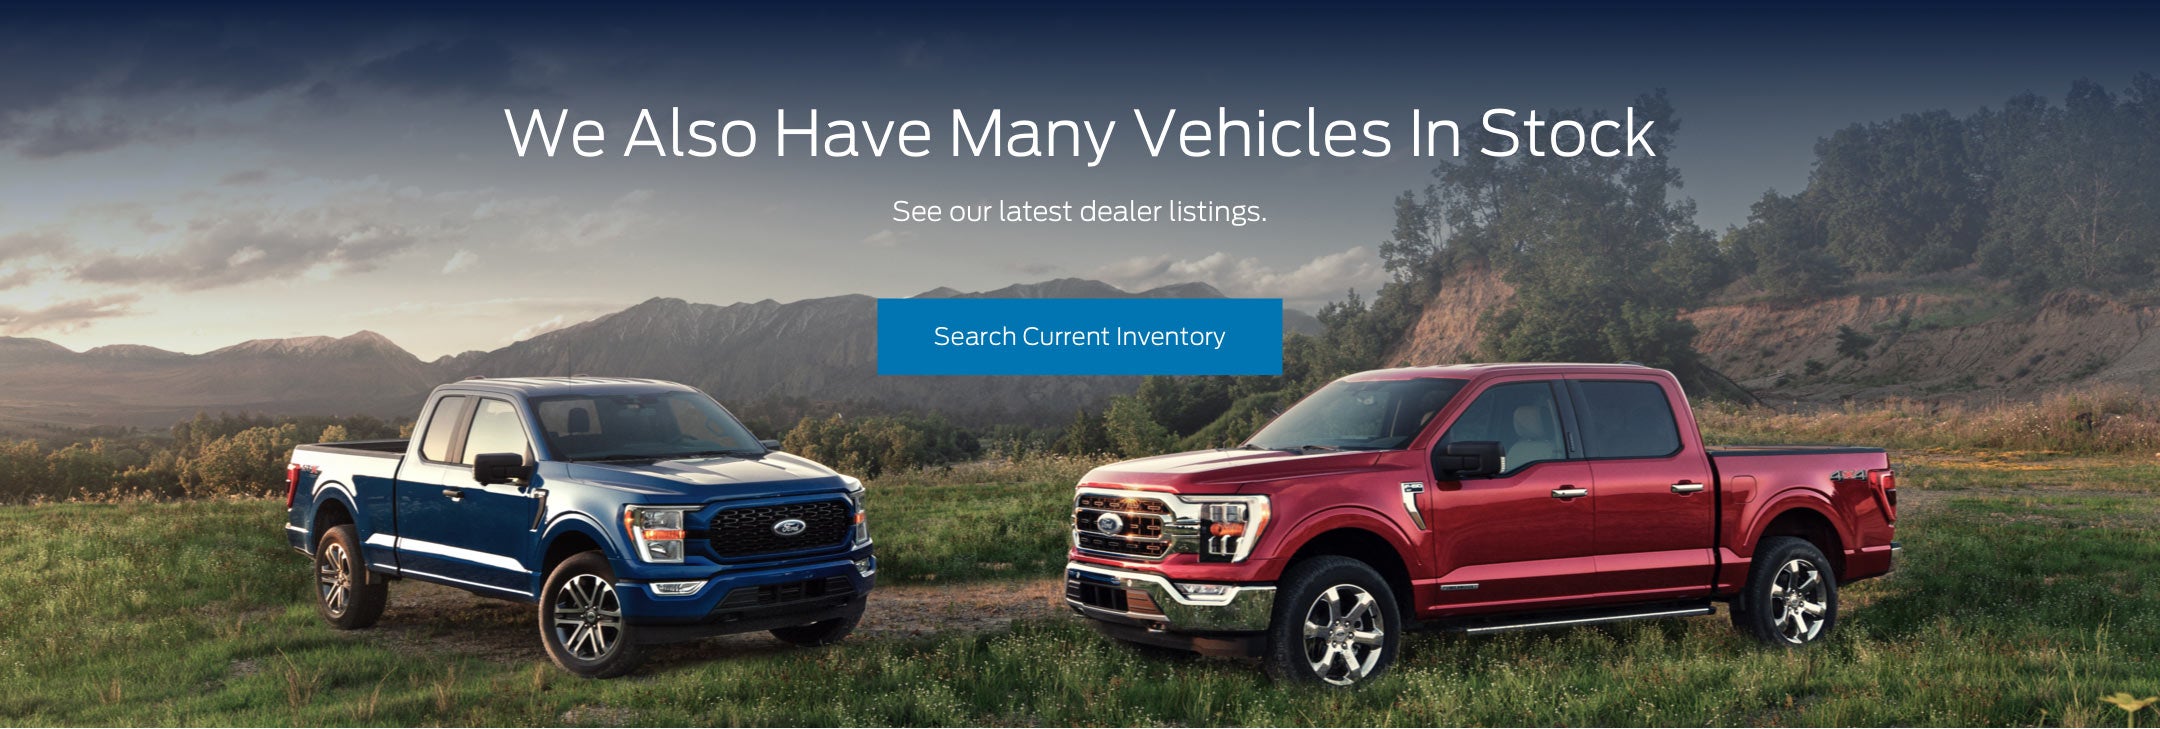 Ford vehicles in stock | Lundeen Brothers Ford of Annandale Inc. in Annandale MN